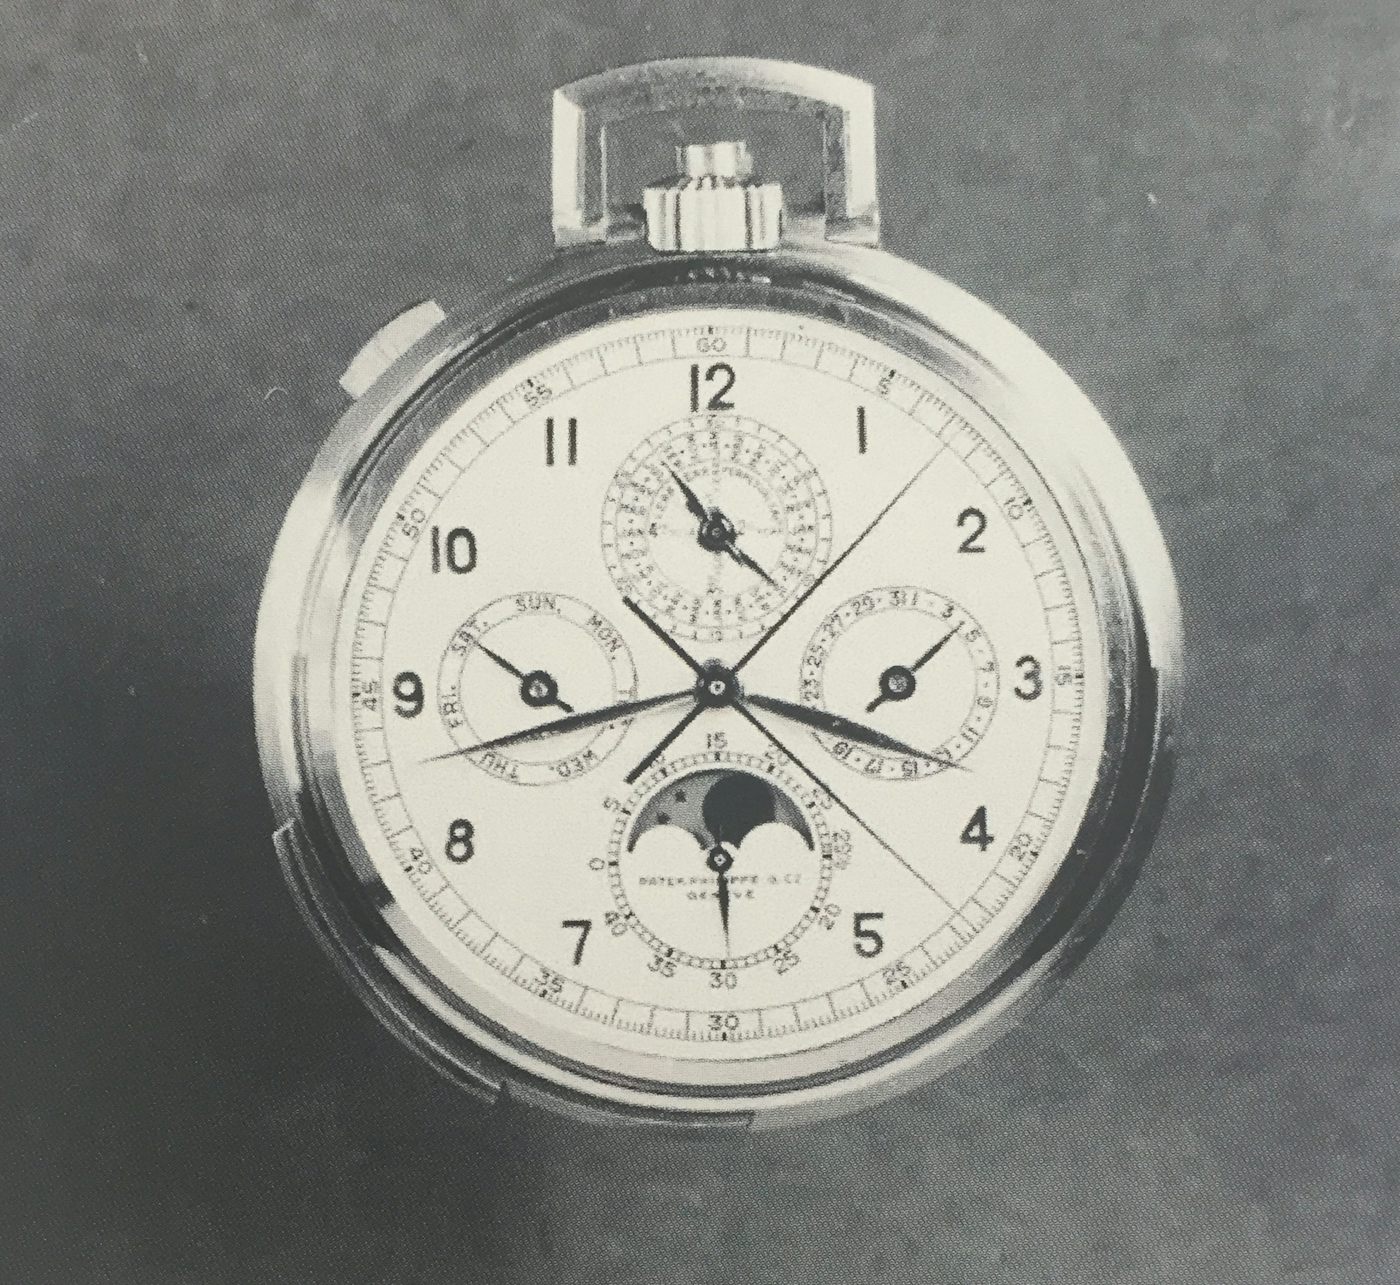 Found The Dalai Lama's Patek Philippe, Gifted By FDR Via